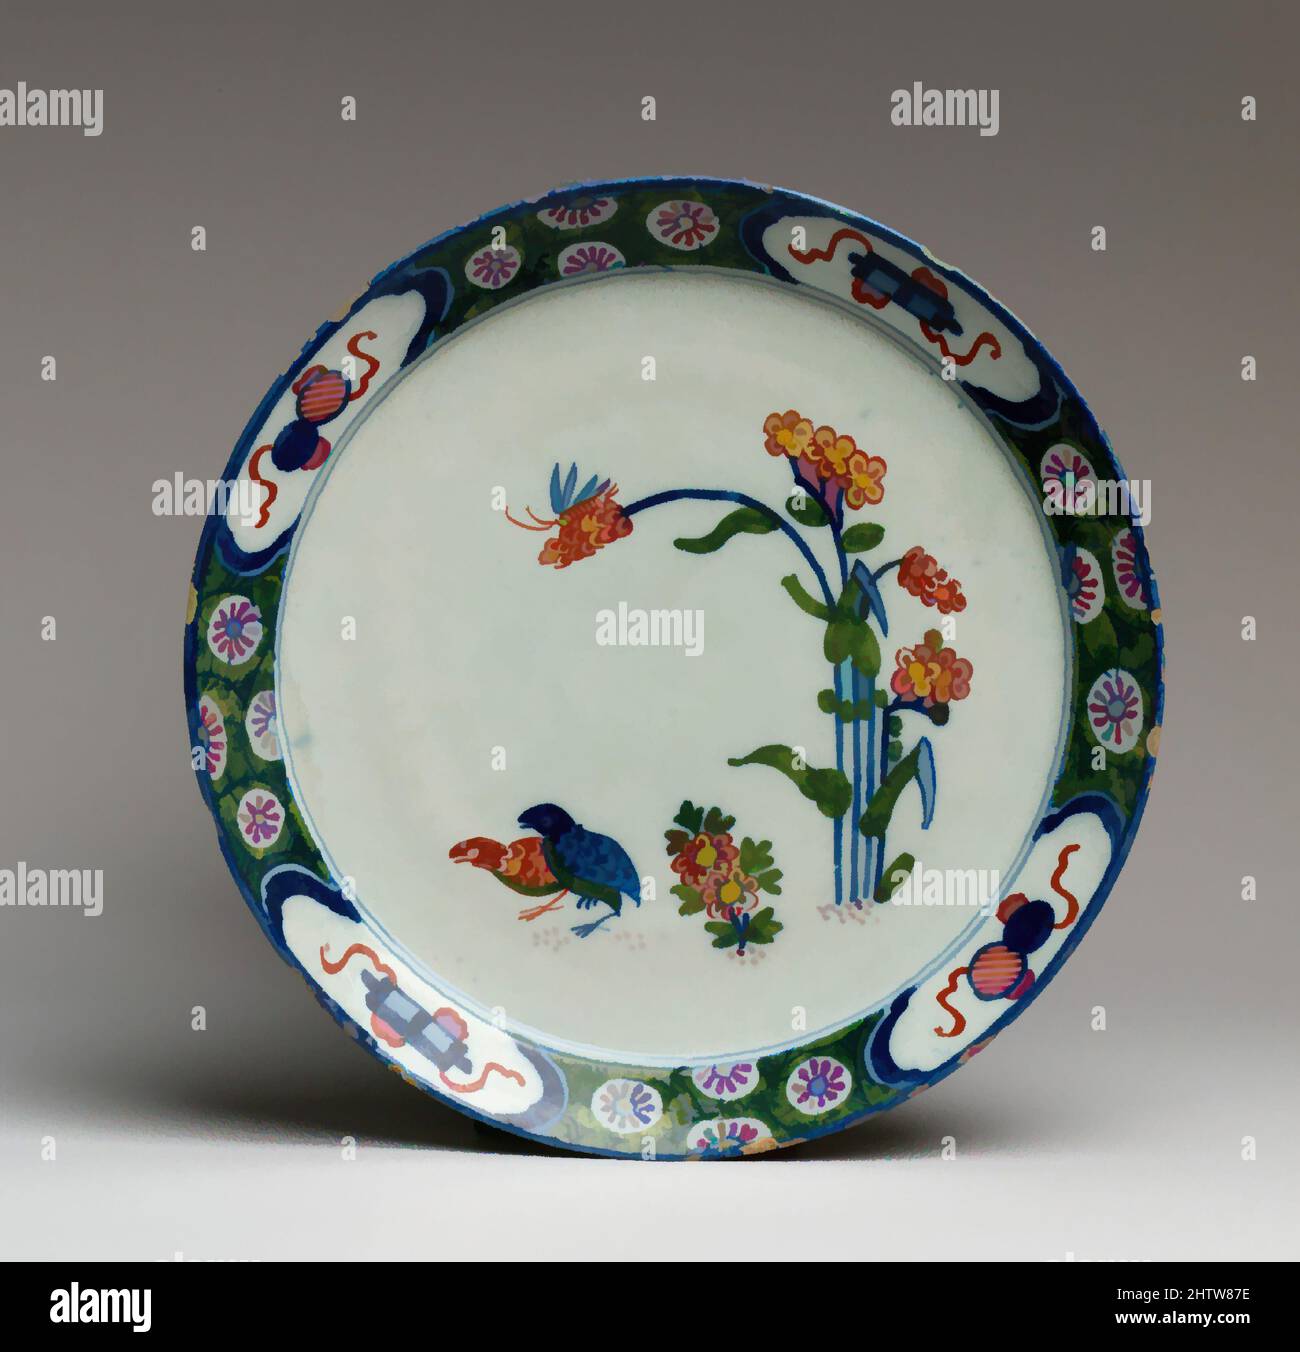 Art inspired by Plate, 18th century, Dutch, Delft, Tin-glazed earthenware, Diameter: 9 in. (22.9 cm), Ceramics-Pottery, Classic works modernized by Artotop with a splash of modernity. Shapes, color and value, eye-catching visual impact on art. Emotions through freedom of artworks in a contemporary way. A timeless message pursuing a wildly creative new direction. Artists turning to the digital medium and creating the Artotop NFT Stock Photo